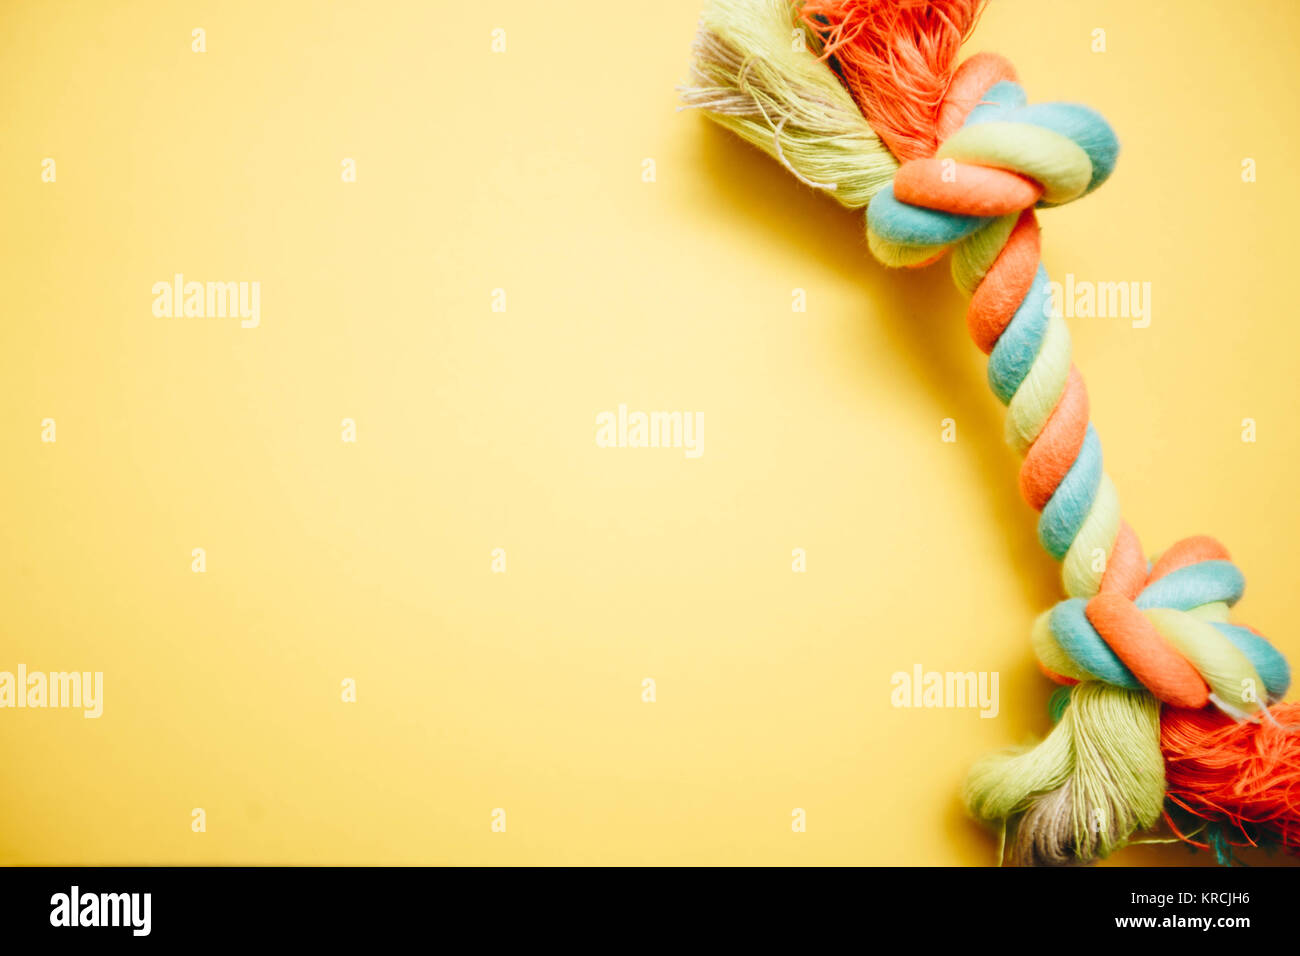 Pets having fun.Colored rope bone dog toy on a bright one-color yellow background. Pet care and veterinary concept. Spase for your text or image. Stock Photo